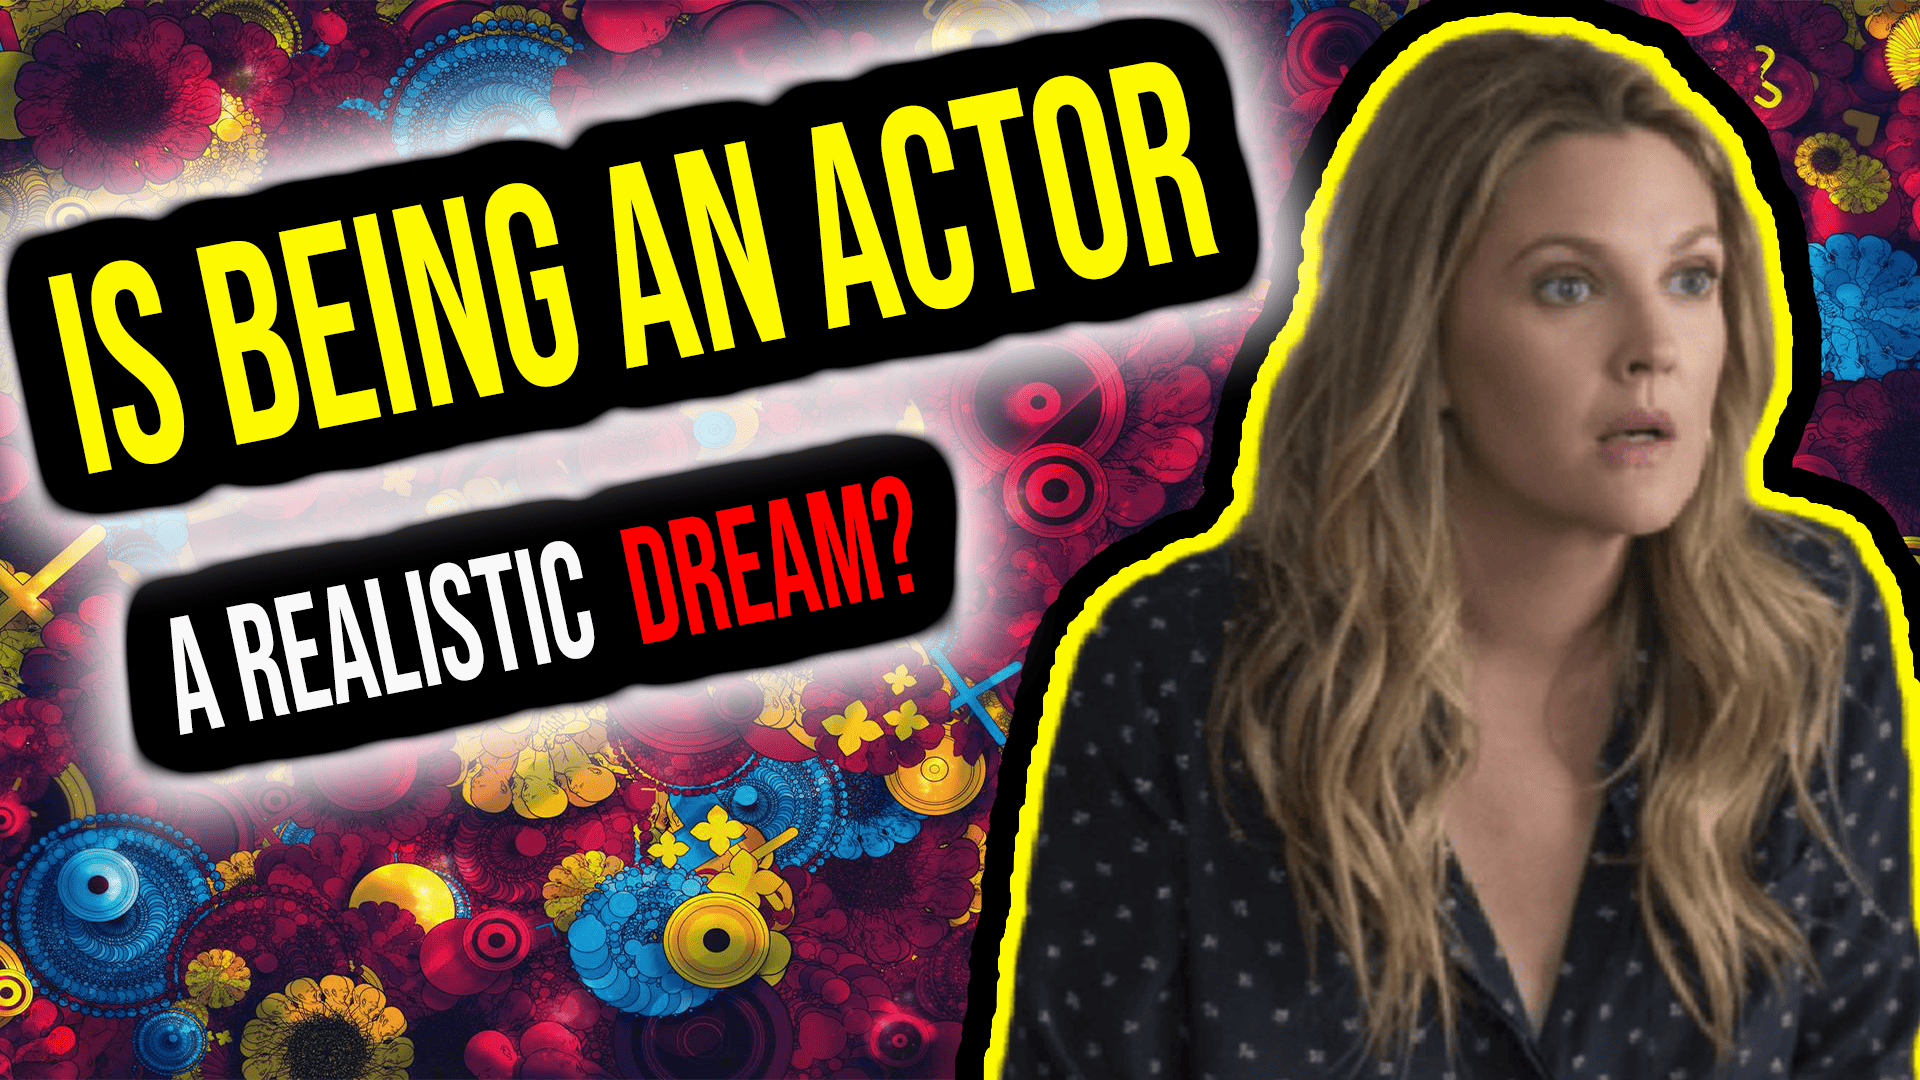 Is Being An Actor Unrealistic? Here's What You Need To Know Before Taking The Leap